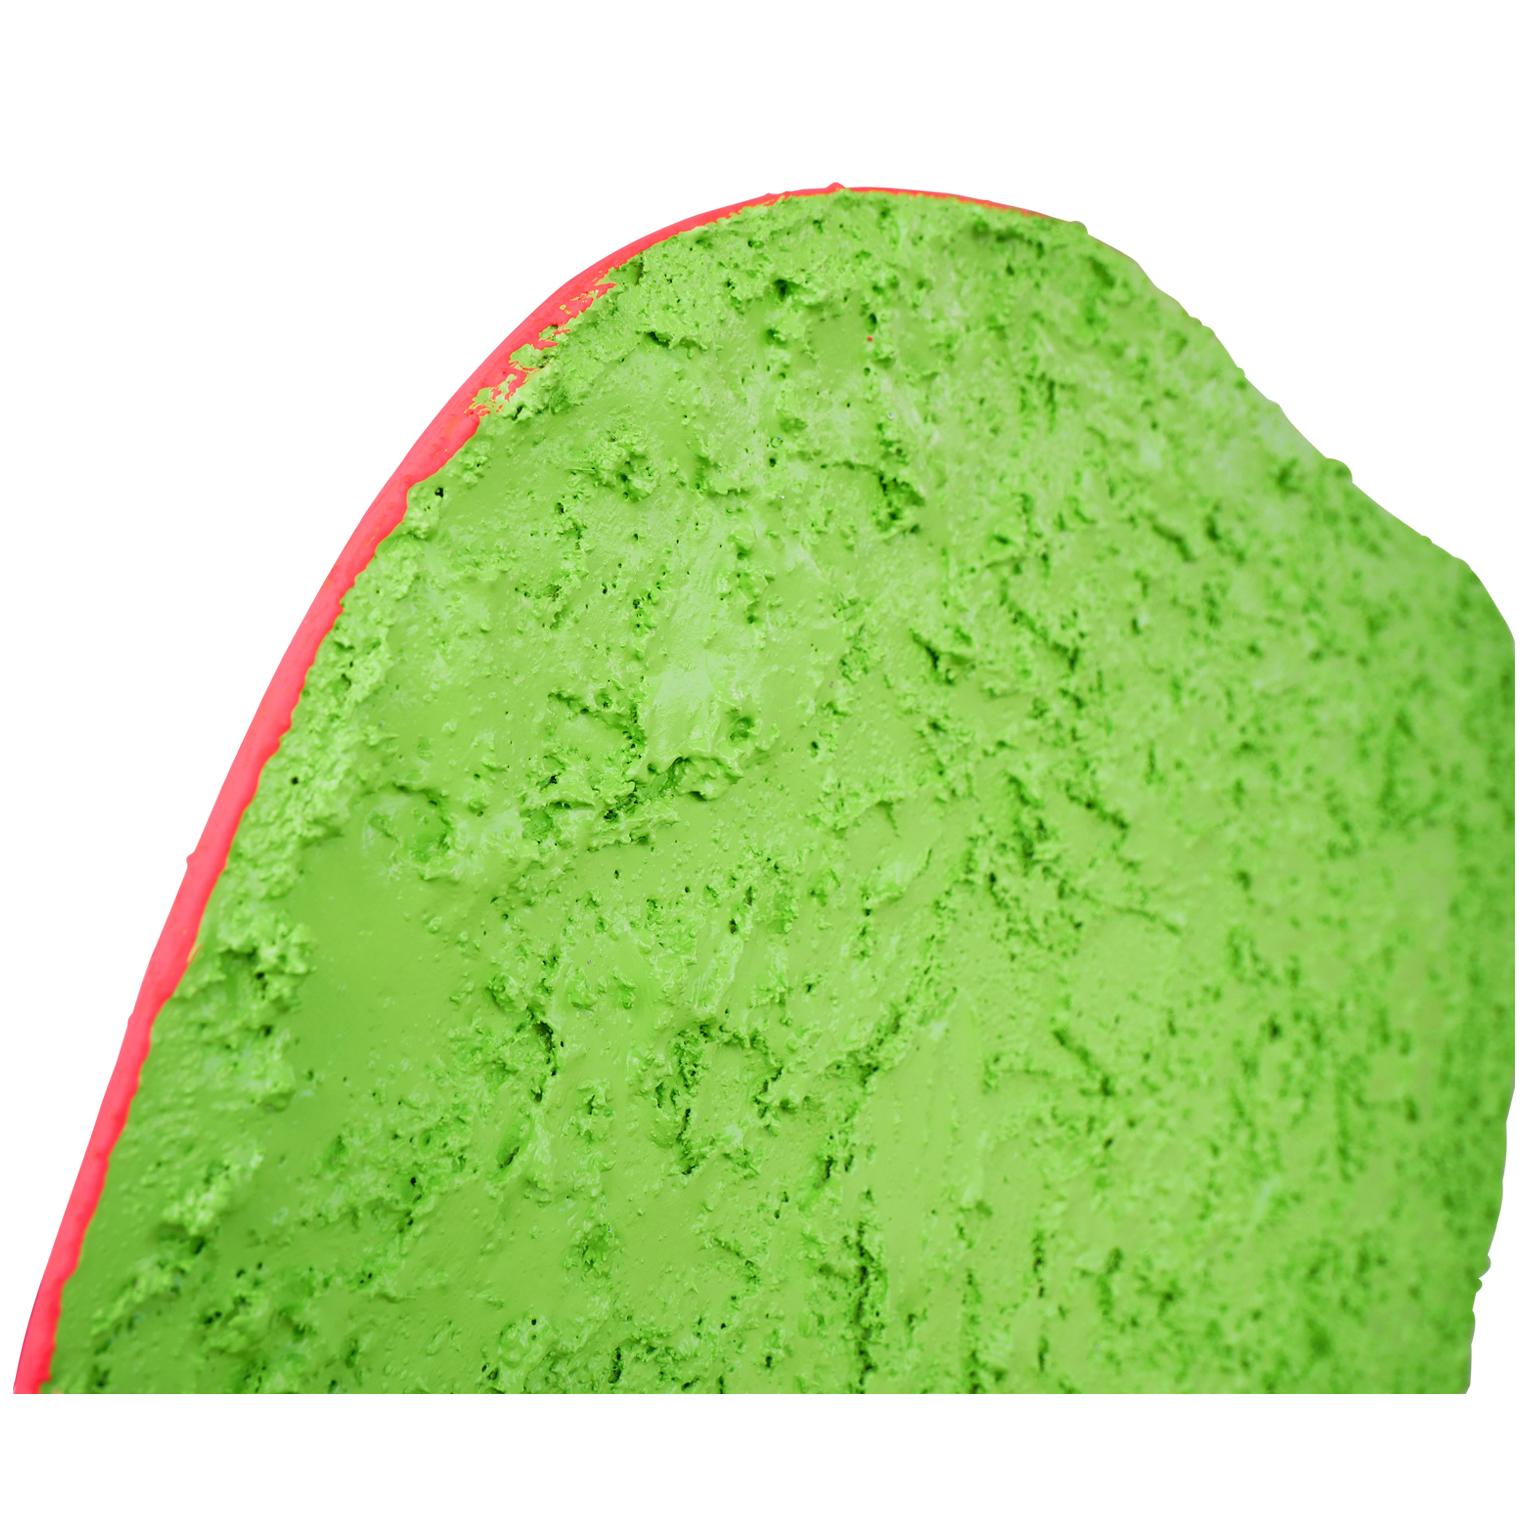 “Plein Air” Bright Green Biomorphic Sawdust Shape with Pink Back Painting For Sale 1